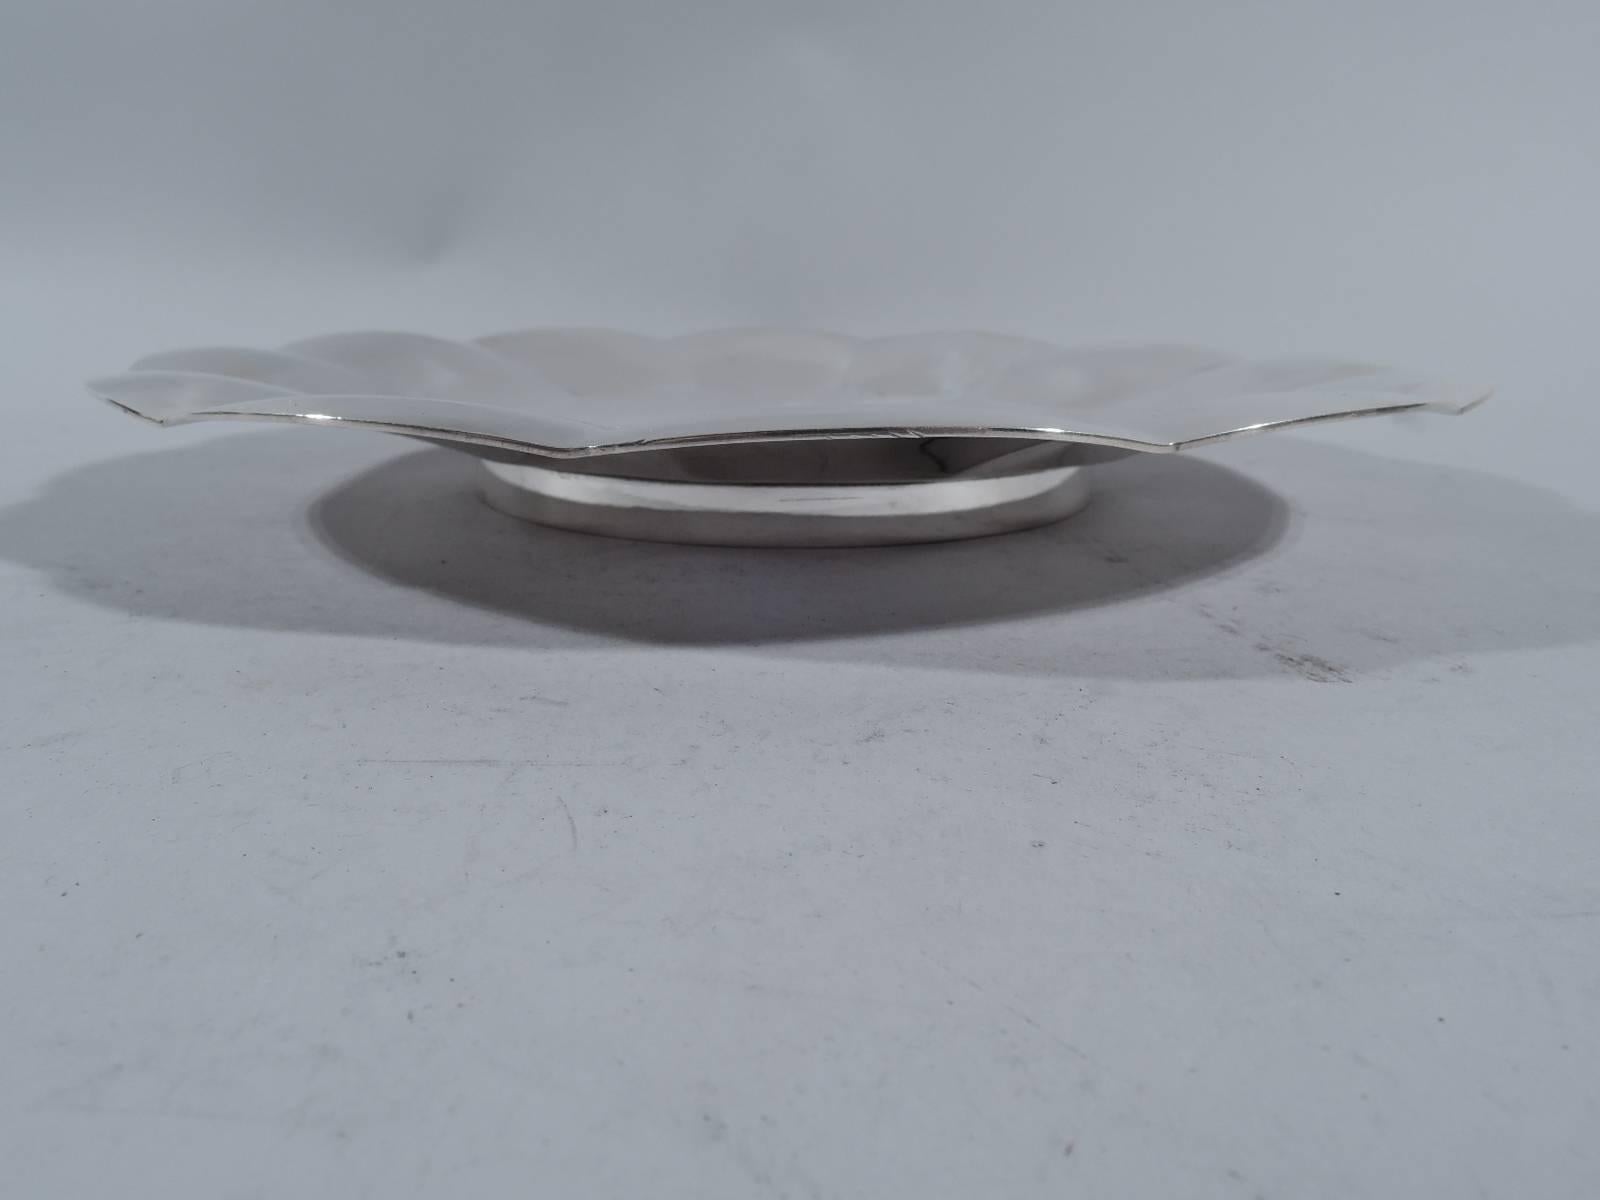 Modern sterling silver cake plate. Made by Tiffany & Co. in New York, circa 1940. Flat well and sloping sides with wide convex petals and shallow scalloping. Rests on short straight foot. Hallmark includes pattern no. 22929 (first produced in 1940).